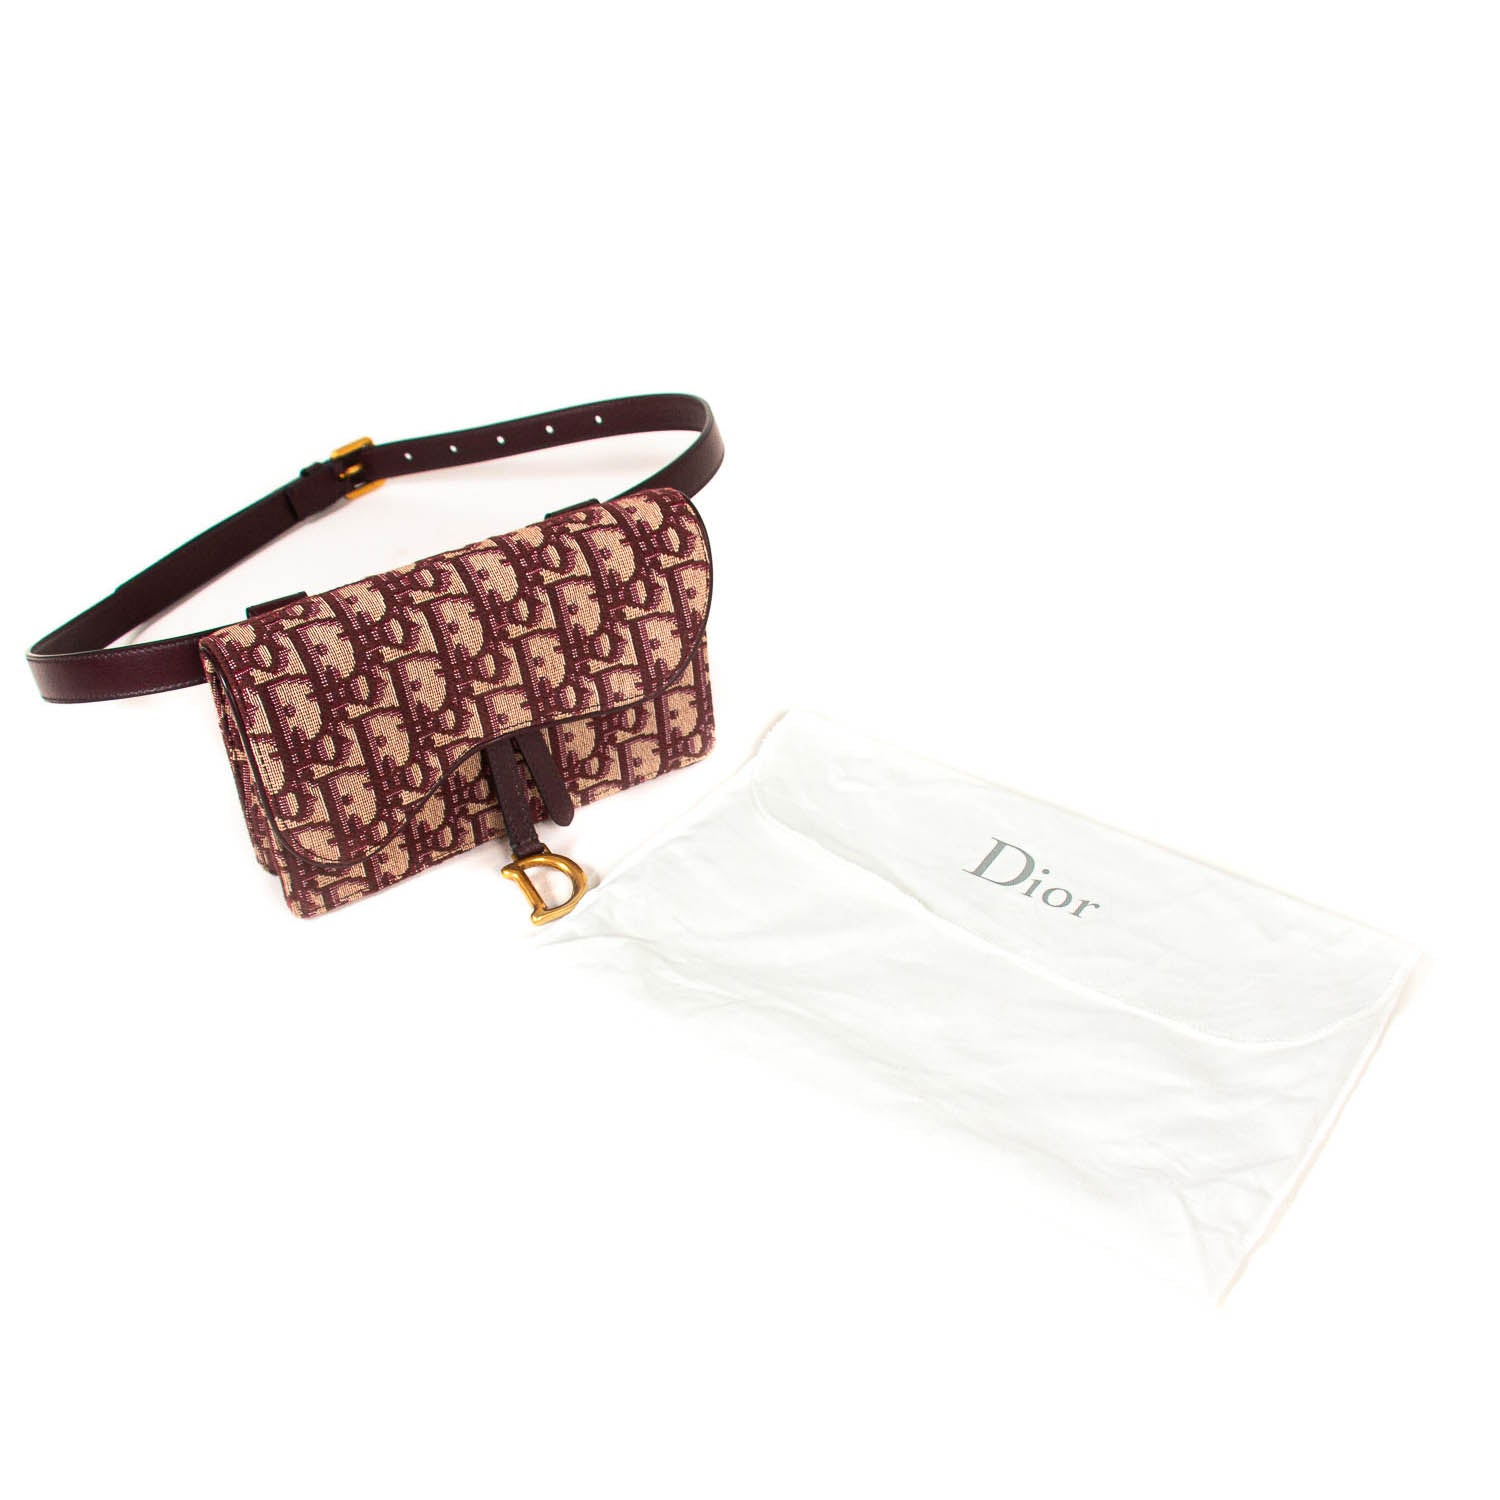 Shop authentic Christian Dior Saddle Belt Pouch at revogue for just USD ...